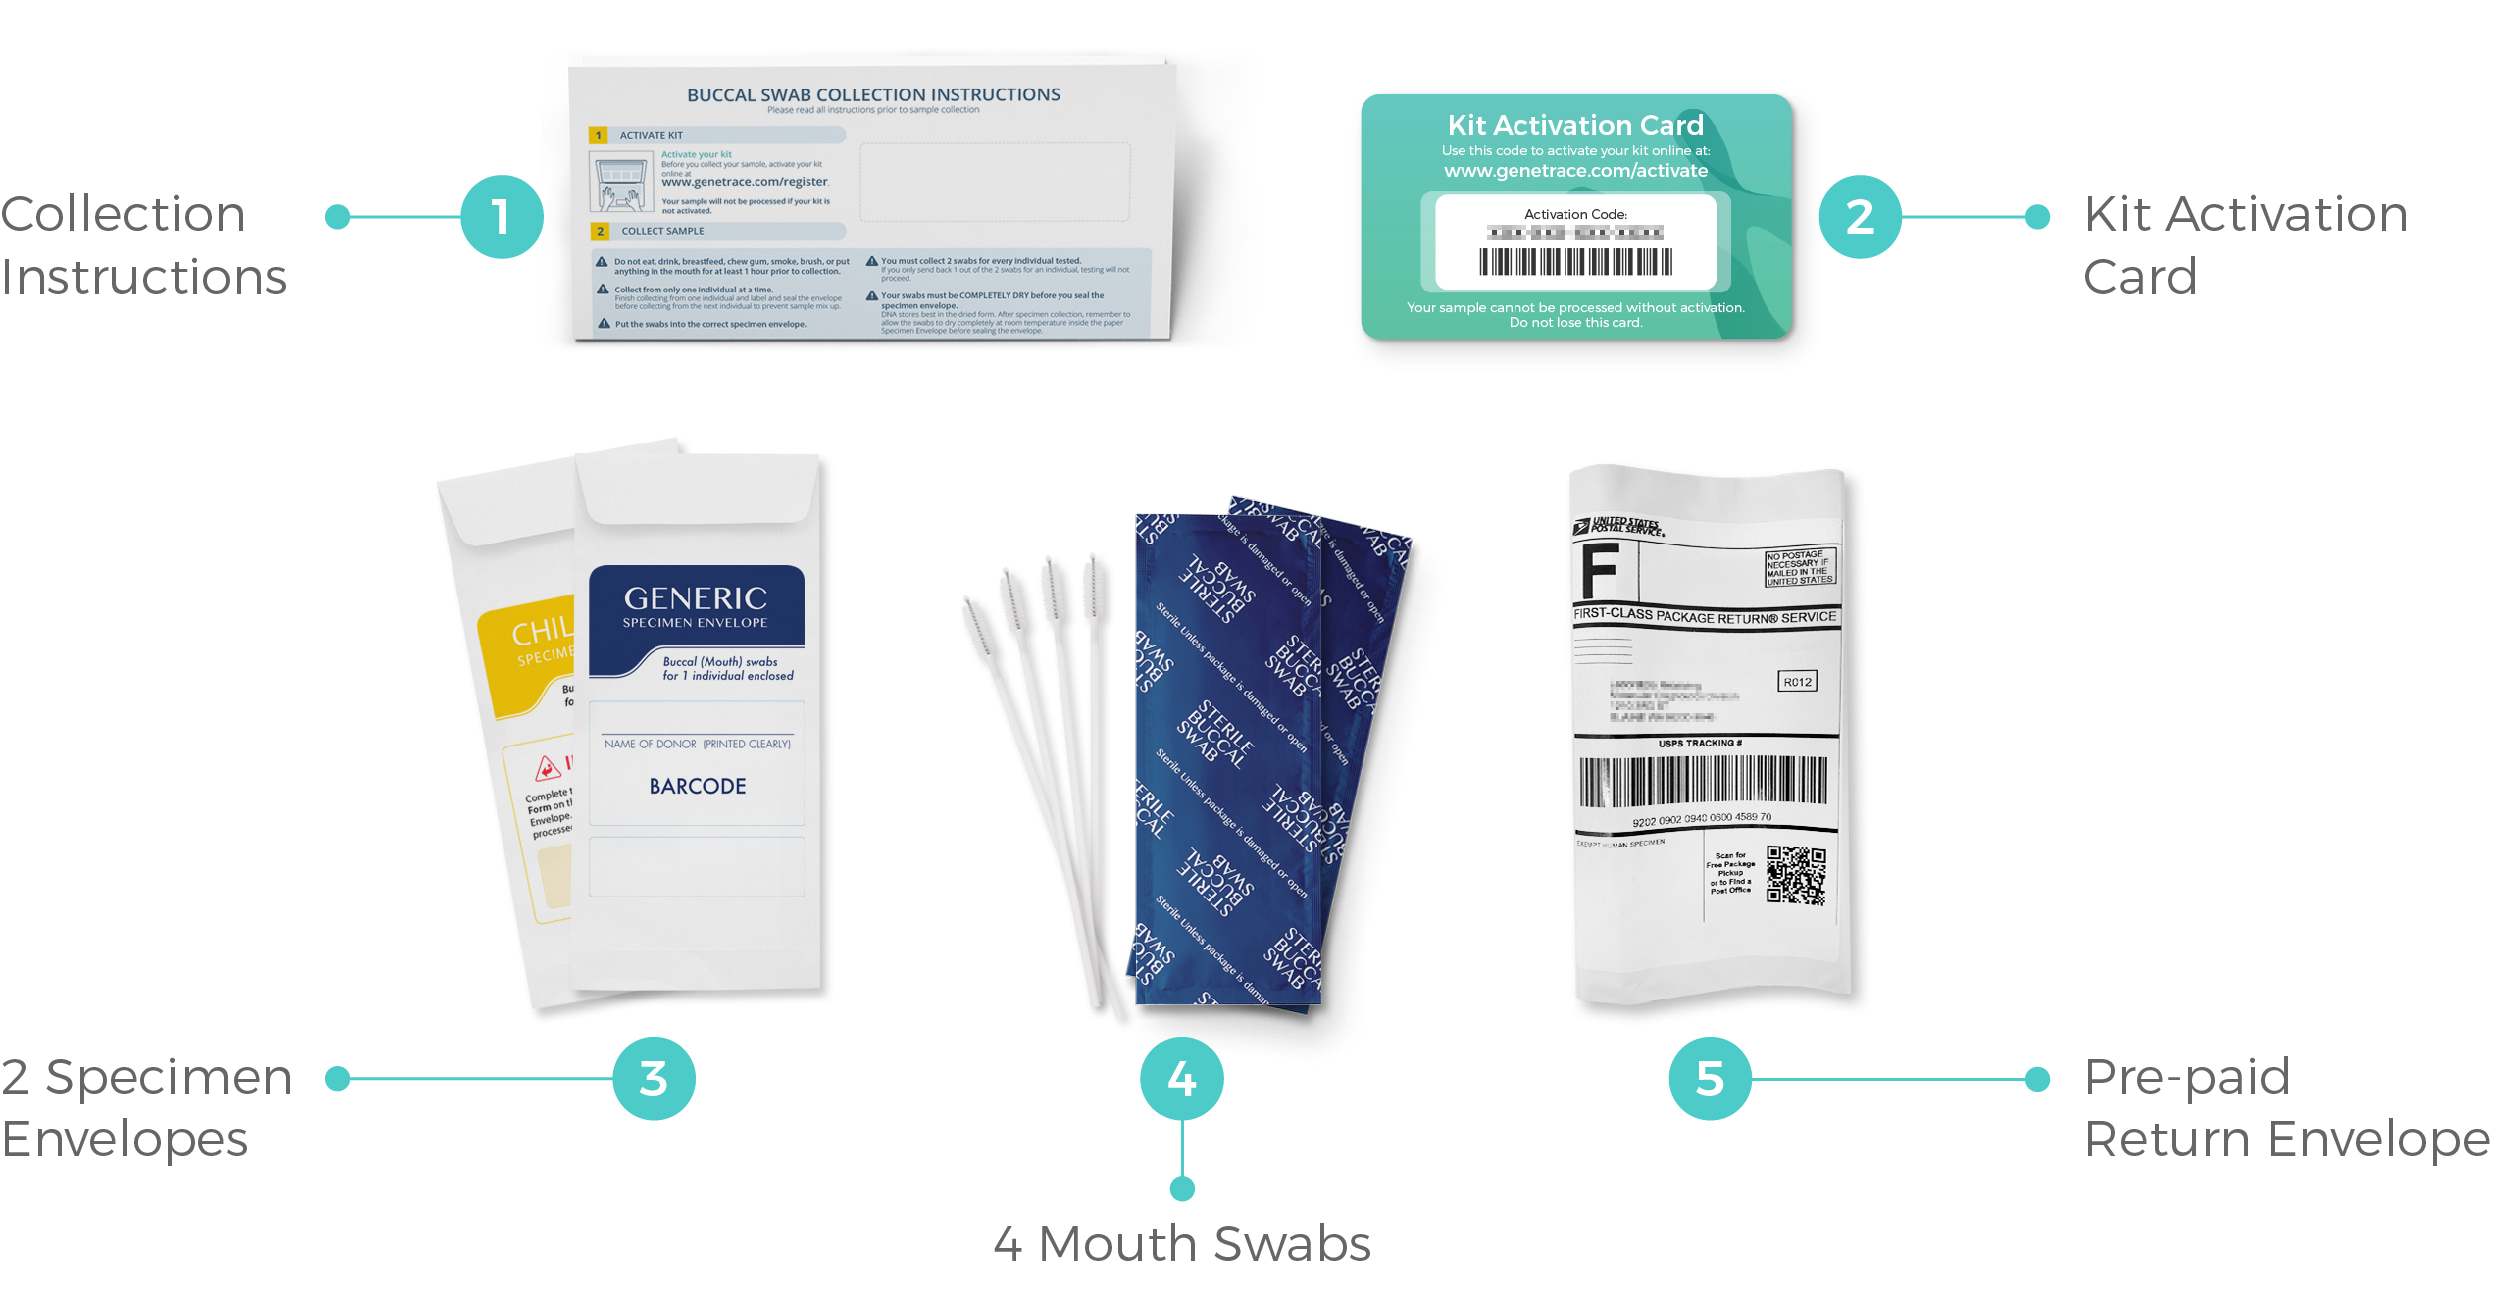 Contents of the Genetrace paternity test kit, which includes swabs for collecting samples, specimen envelopes to hold the samples, instructions for collecting the samples, a kit activation card, and a prepaid return envelope.